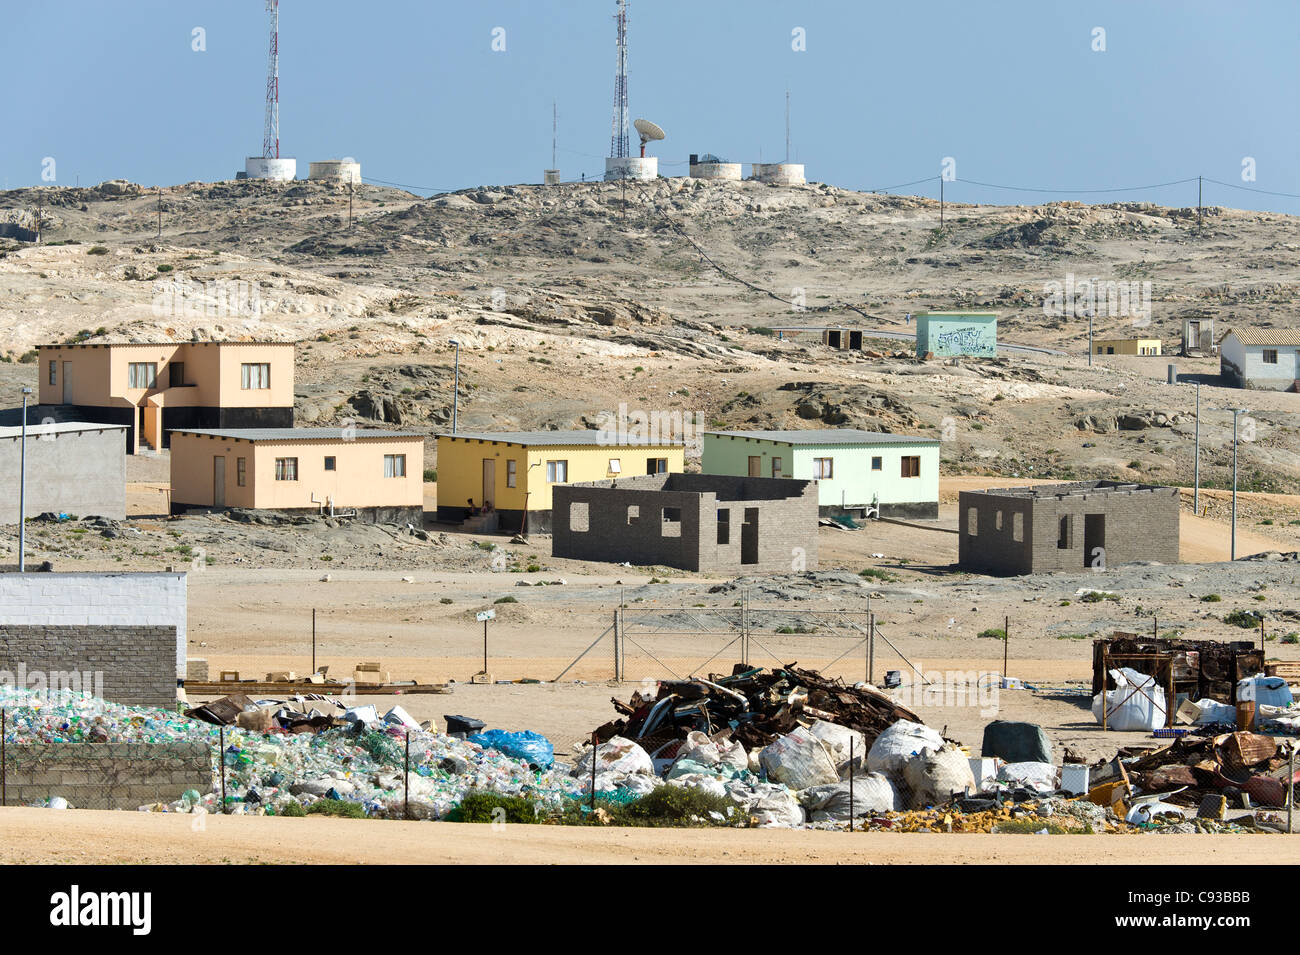 Garbage collection in a new housing area on the outskirts of Luederitz Namibia Stock Photo